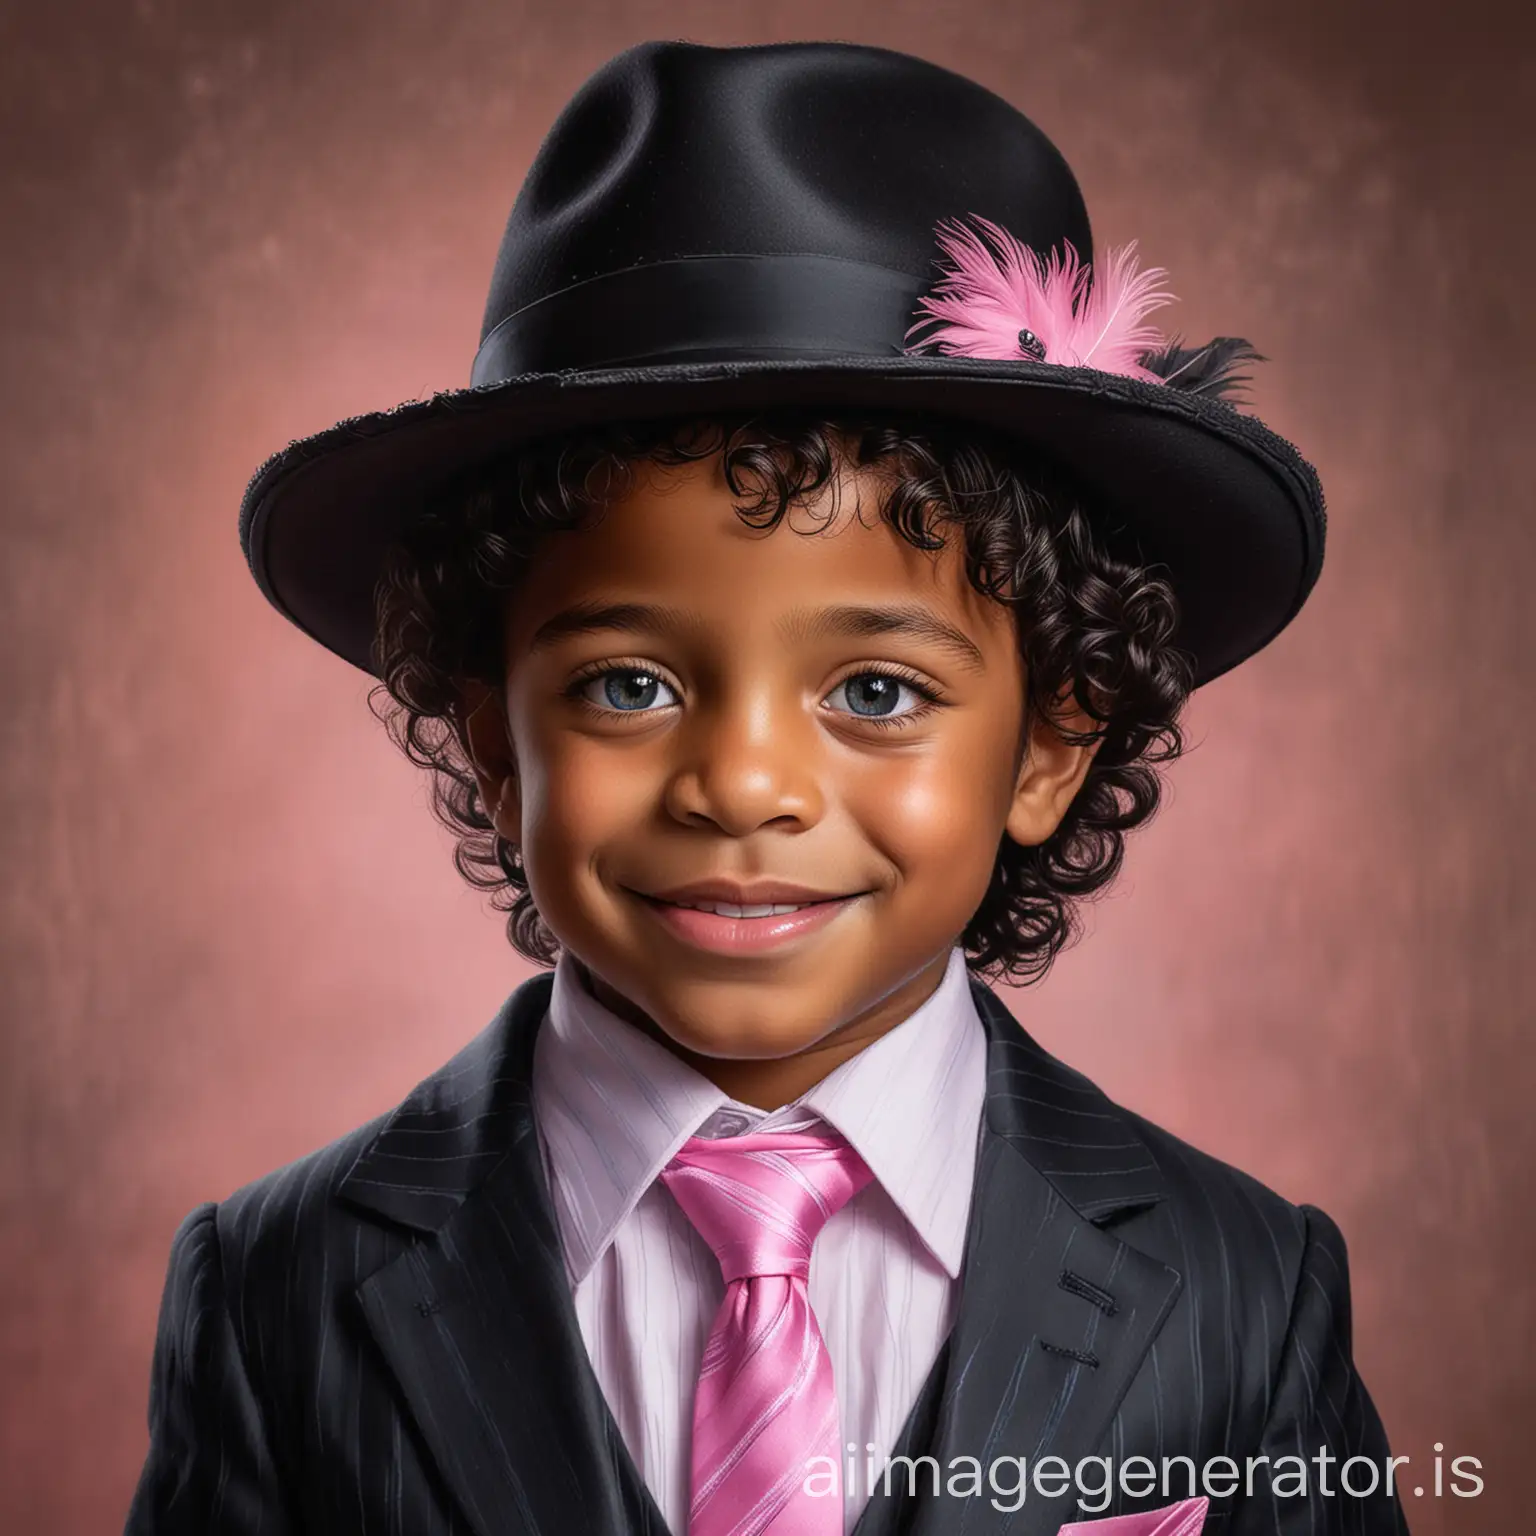 Portrait-of-Smiling-Black-Colombian-Boy-in-Pink-Suit-and-Fedora